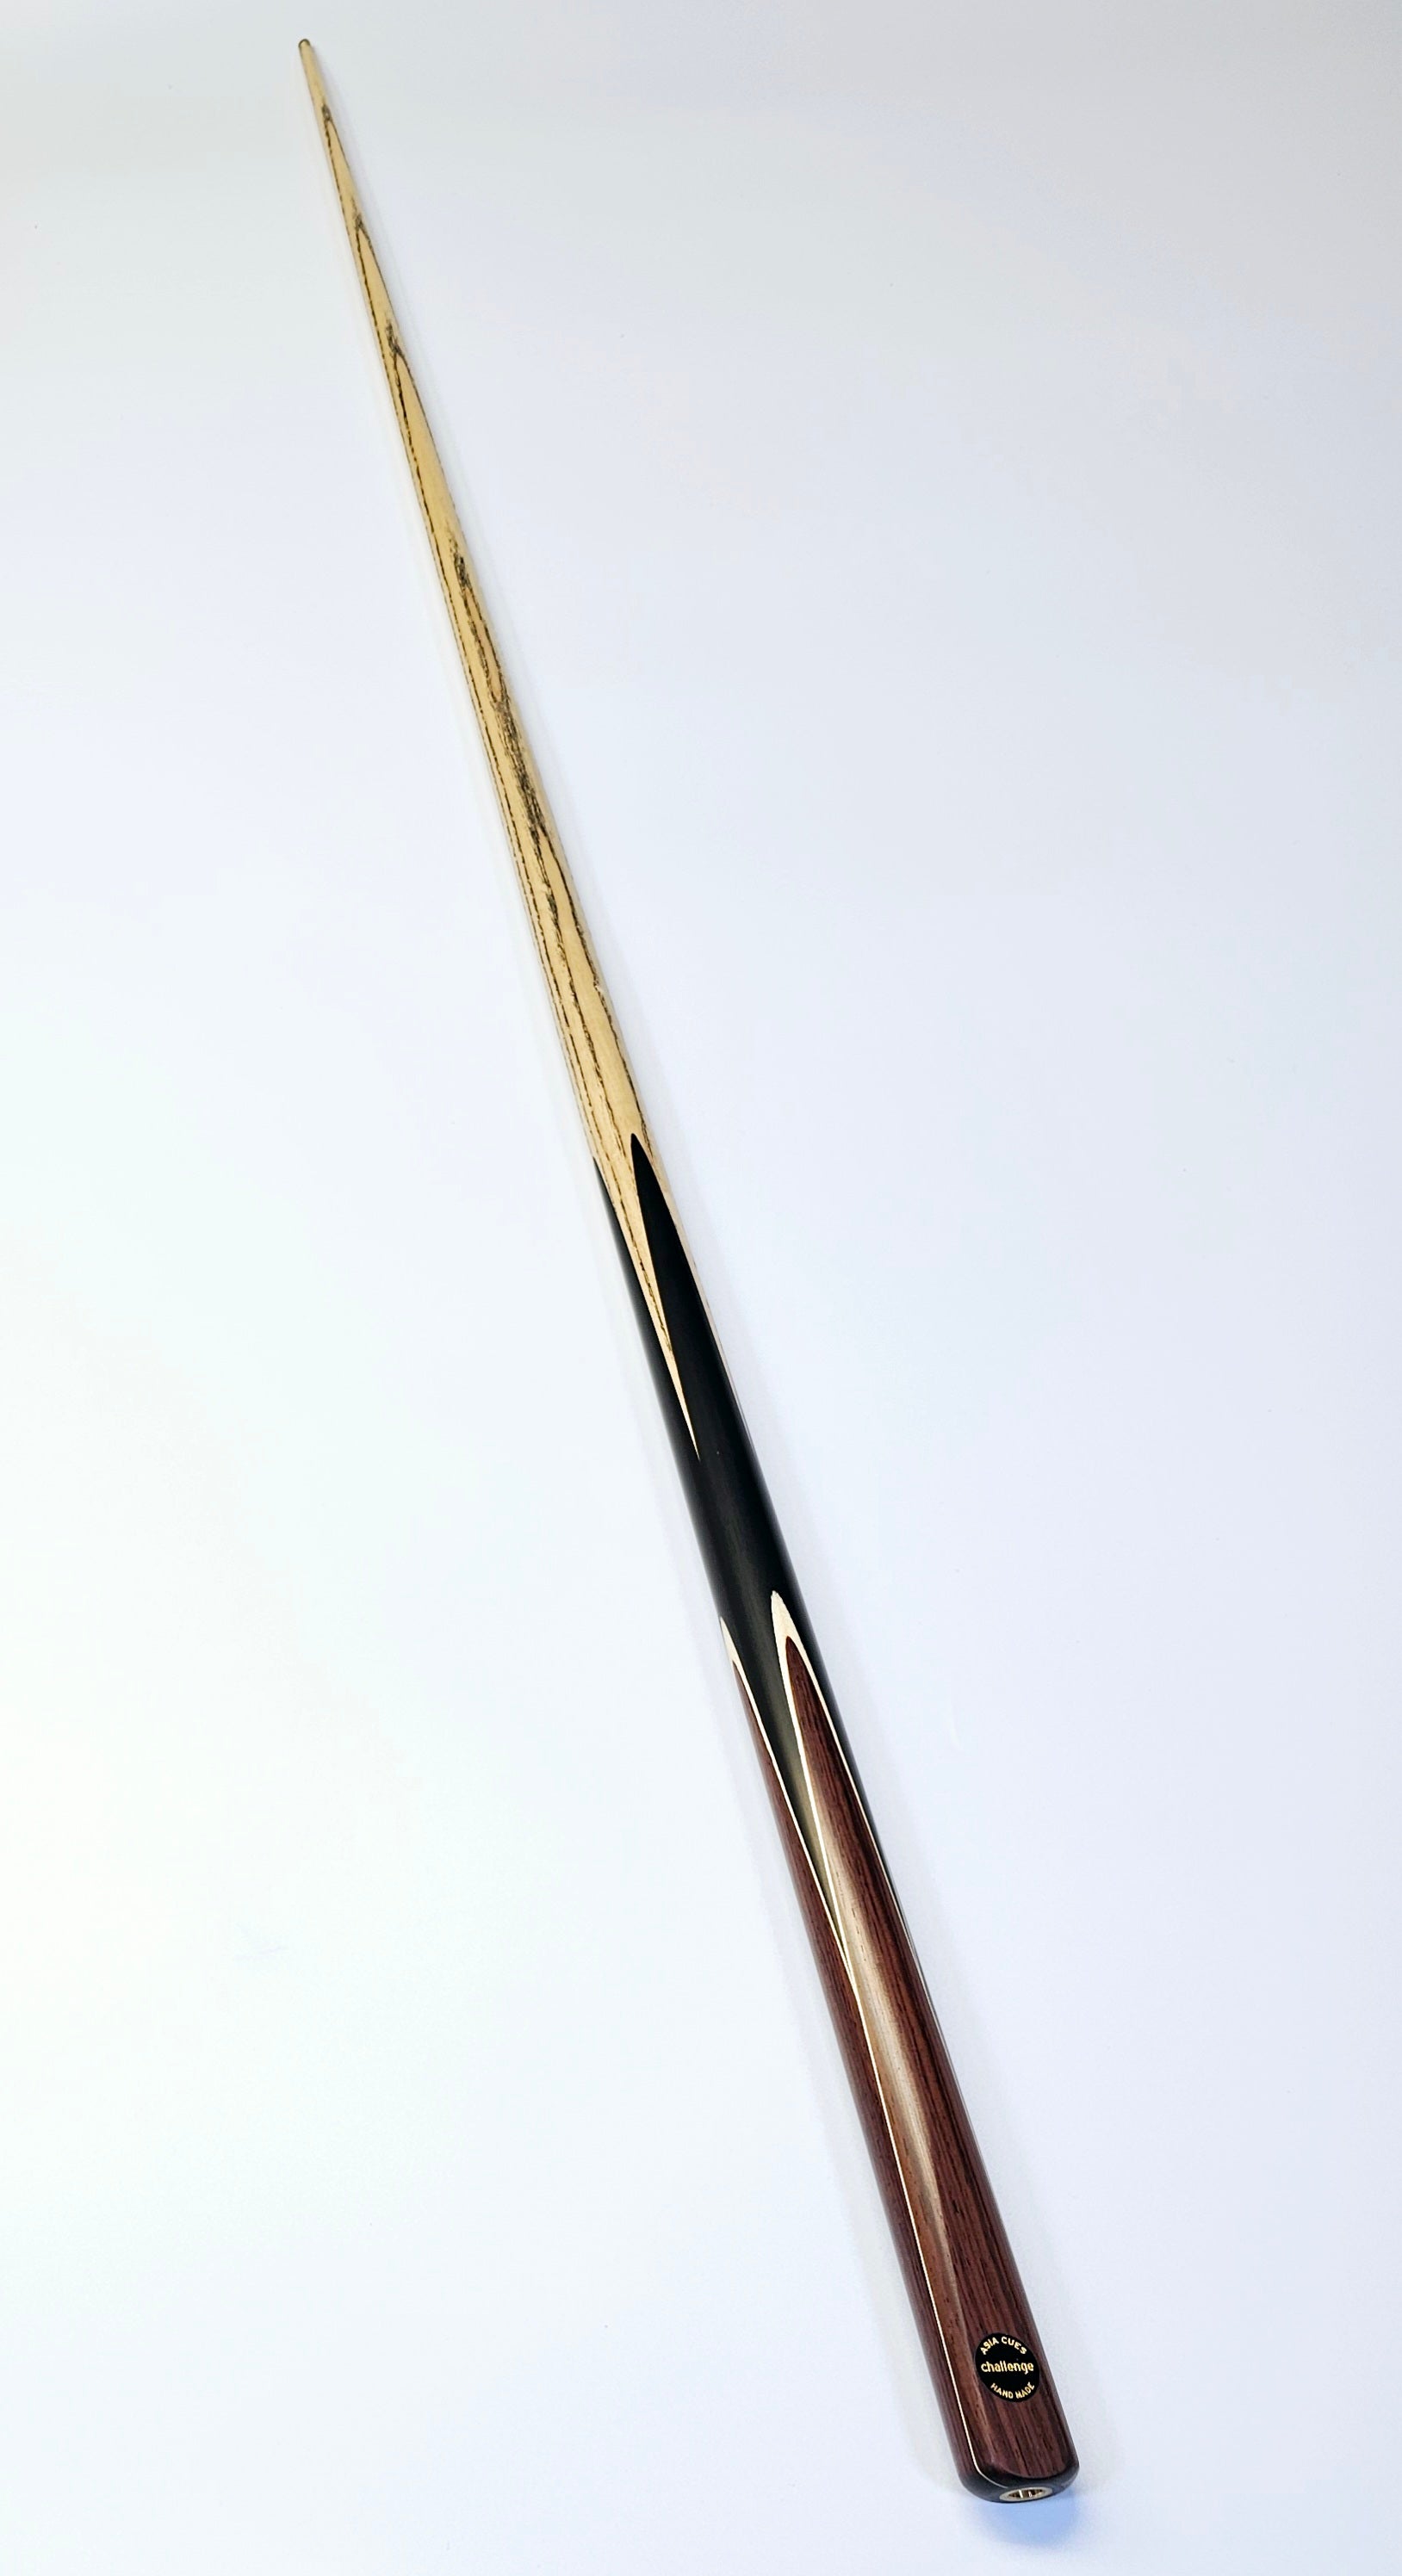 Asia Cues Challenge - One Piece Pool Cue 8.7mm Tip, 17oz, 58"